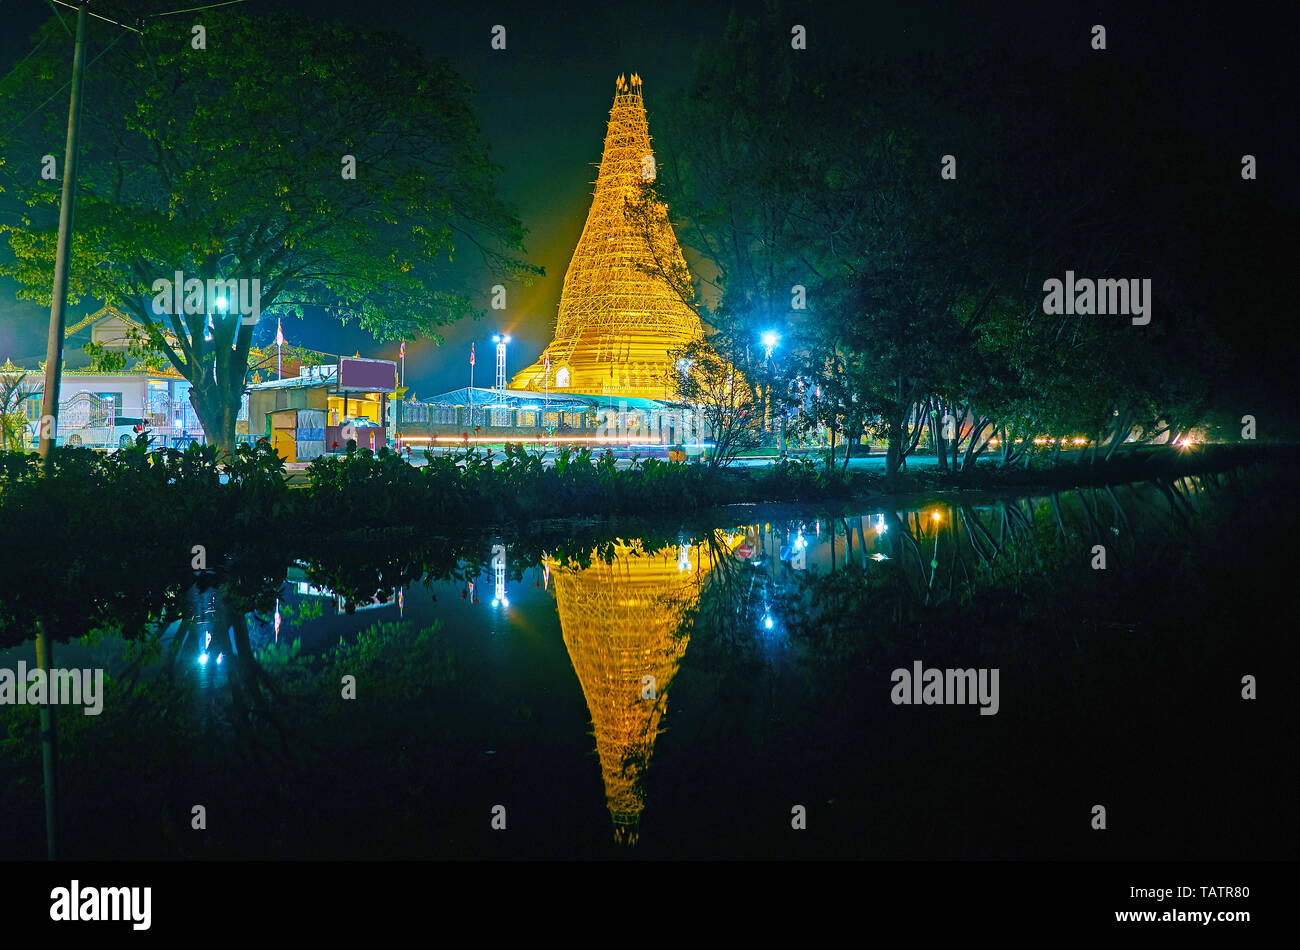 The evening walk along the Tharzi Pond with a view on large golden supa of local Buddhist temple and its reflection in dark water, Nyaungshwe, Myanmar Stock Photo